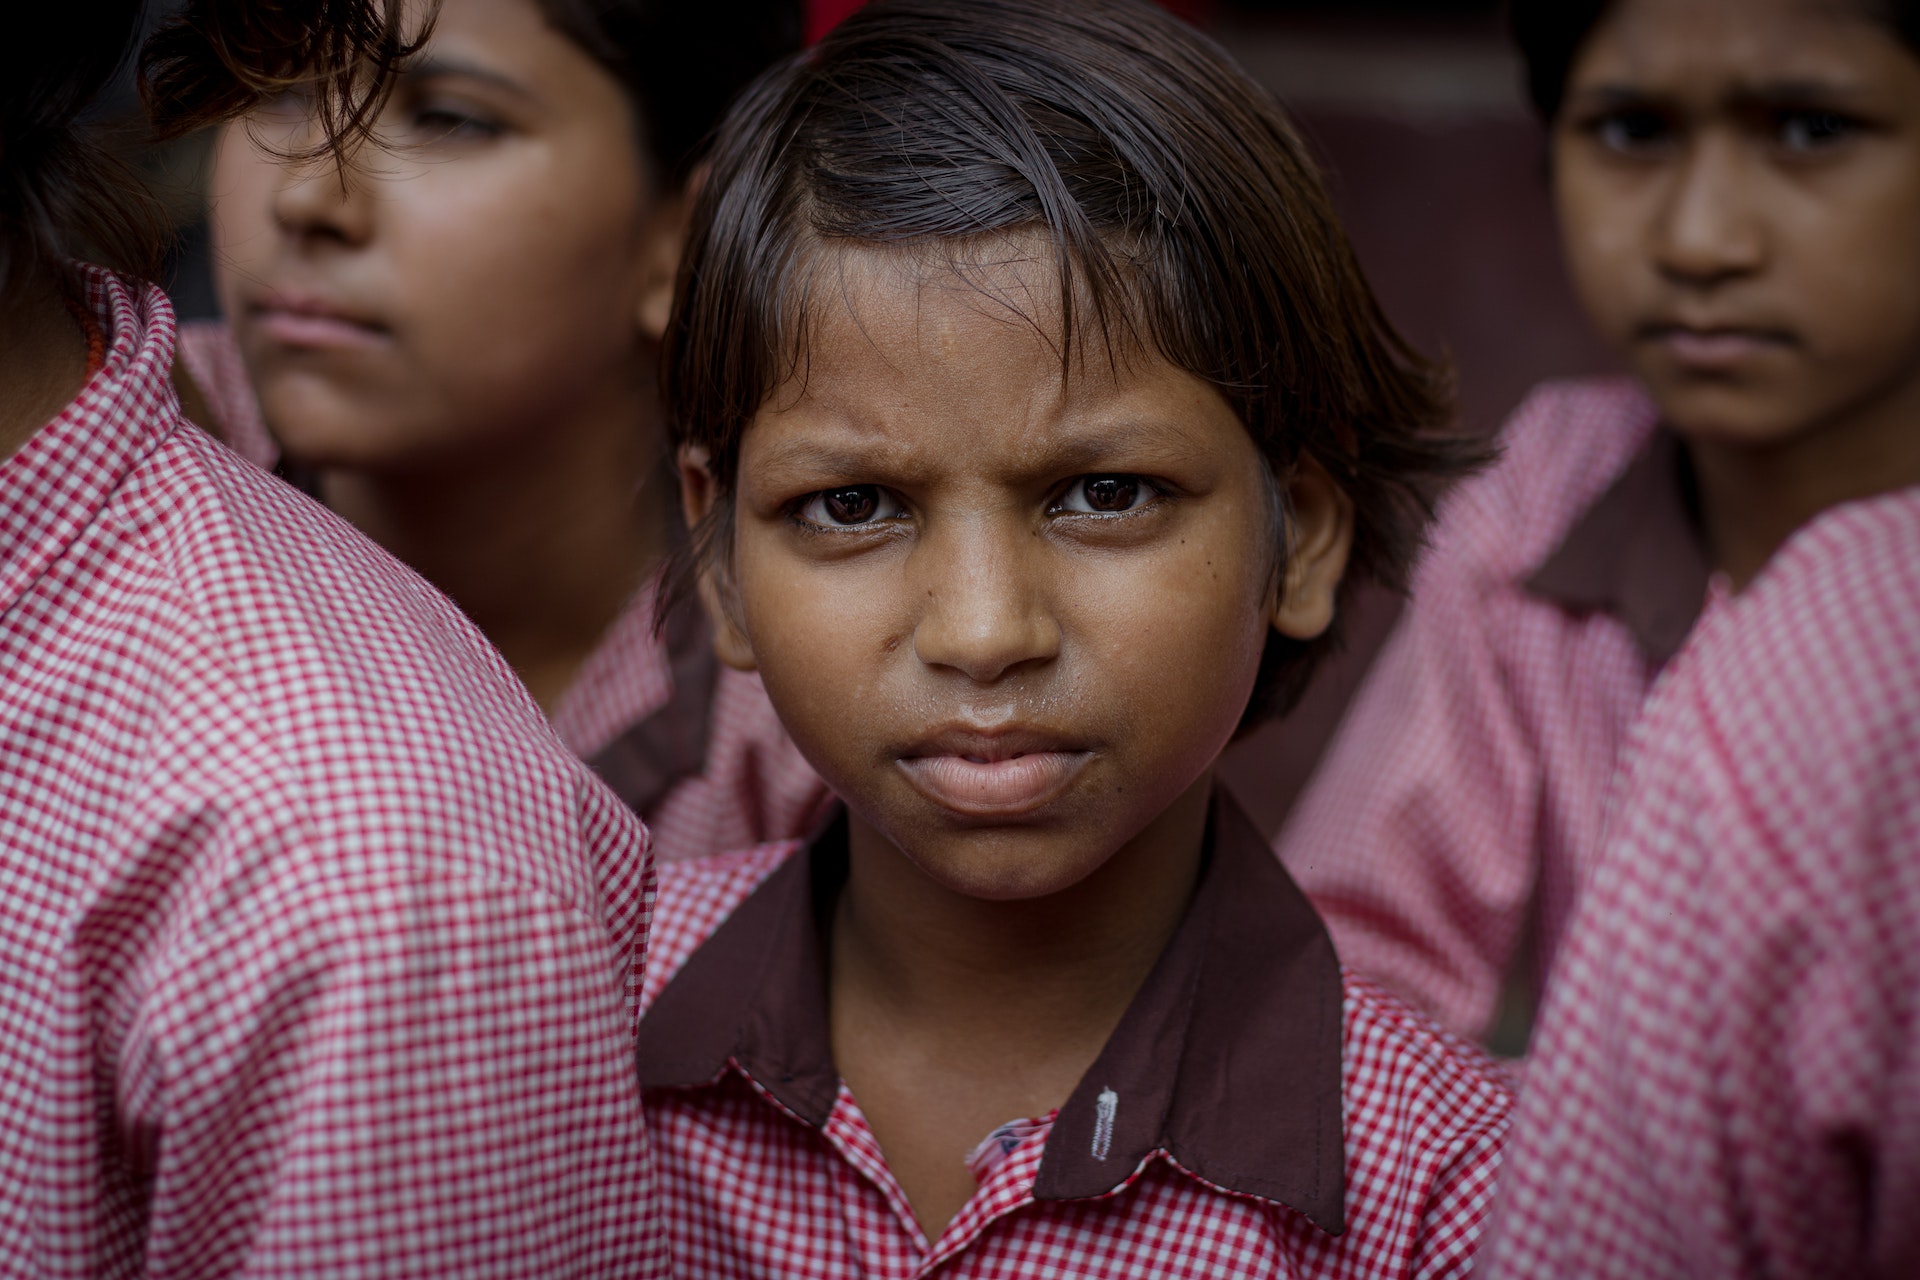 What makes an organization the top NGO in India for the girl child?